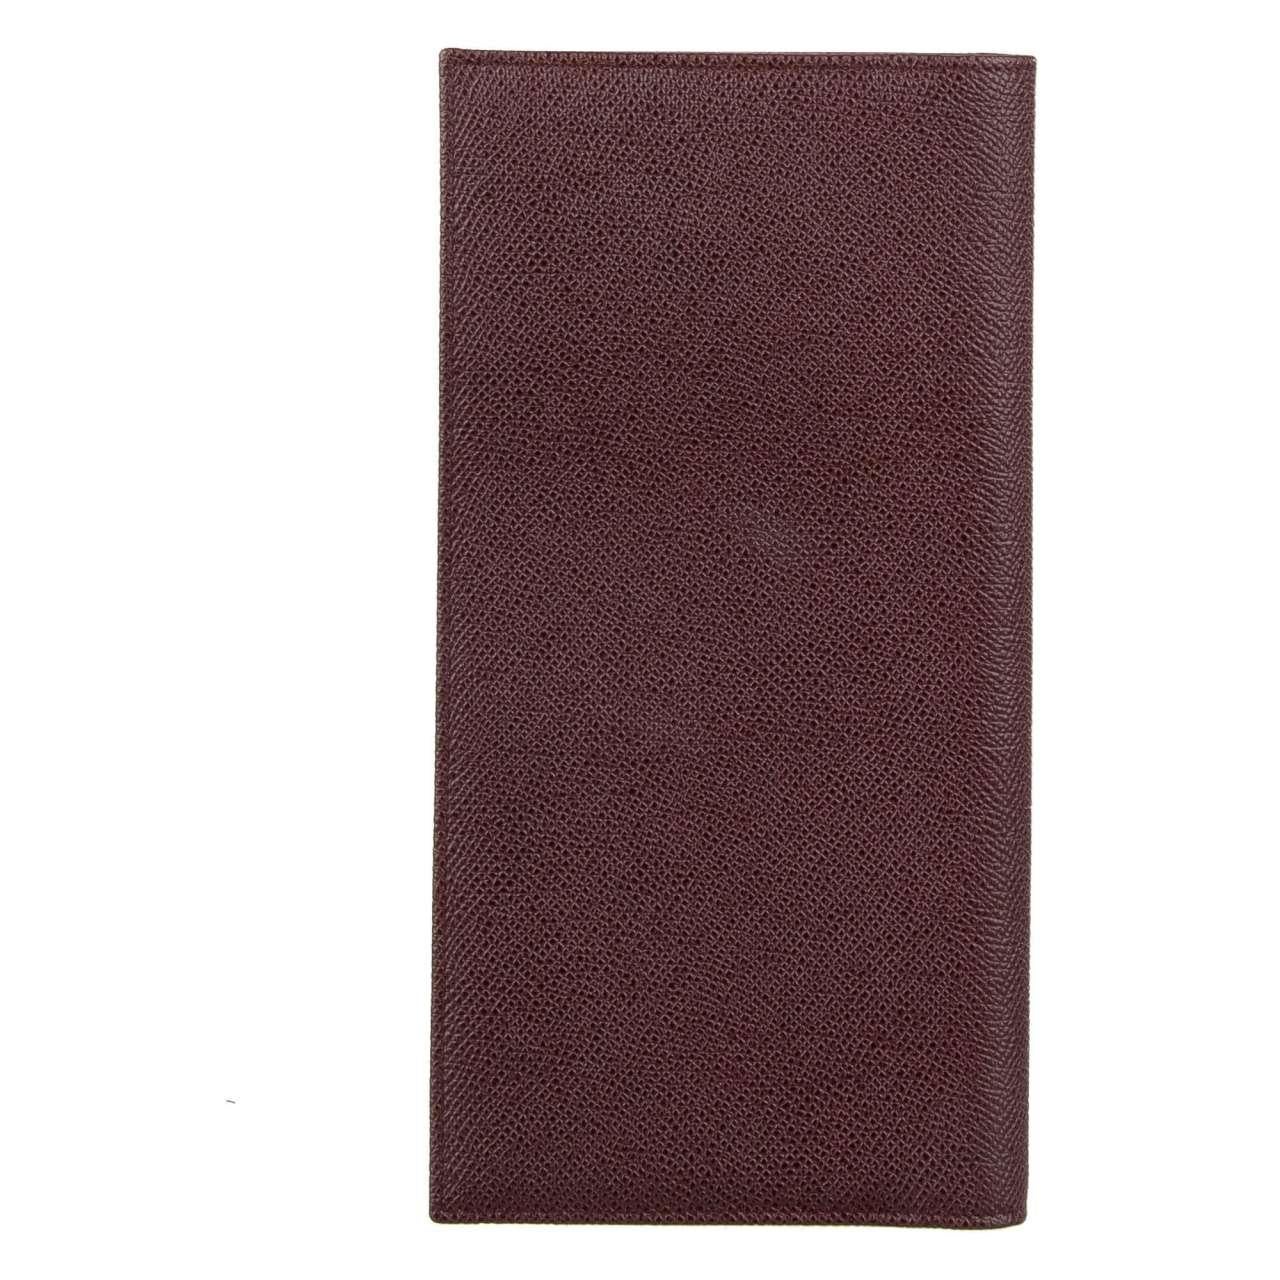 - Large dauphine leather bifold document holder / wallet with many pockets and slots and DG logo plate in cherry red by DOLCE & GABBANA - New with Tag and Authenticity Card - MADE IN ITALY - Former RRP: EUR 425 - Model: BP2032-A1001-80308 -